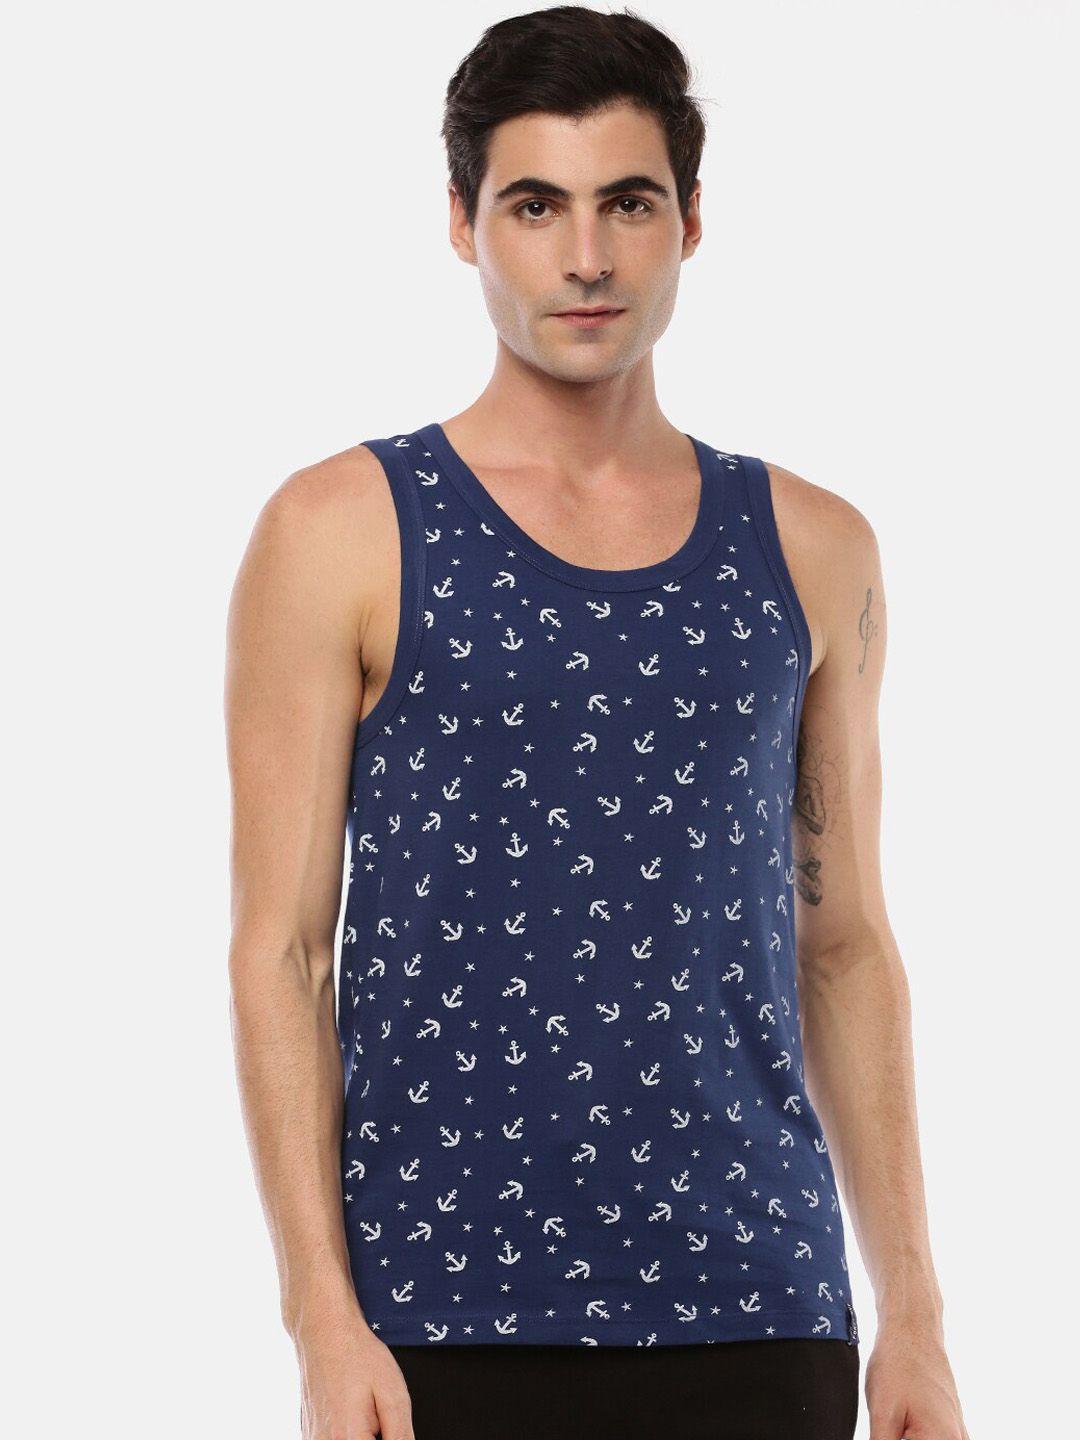 force-nxt-men-navy-blue-&-white-printed-cotton-innerwear-vest-mnal-433-r2-nvy